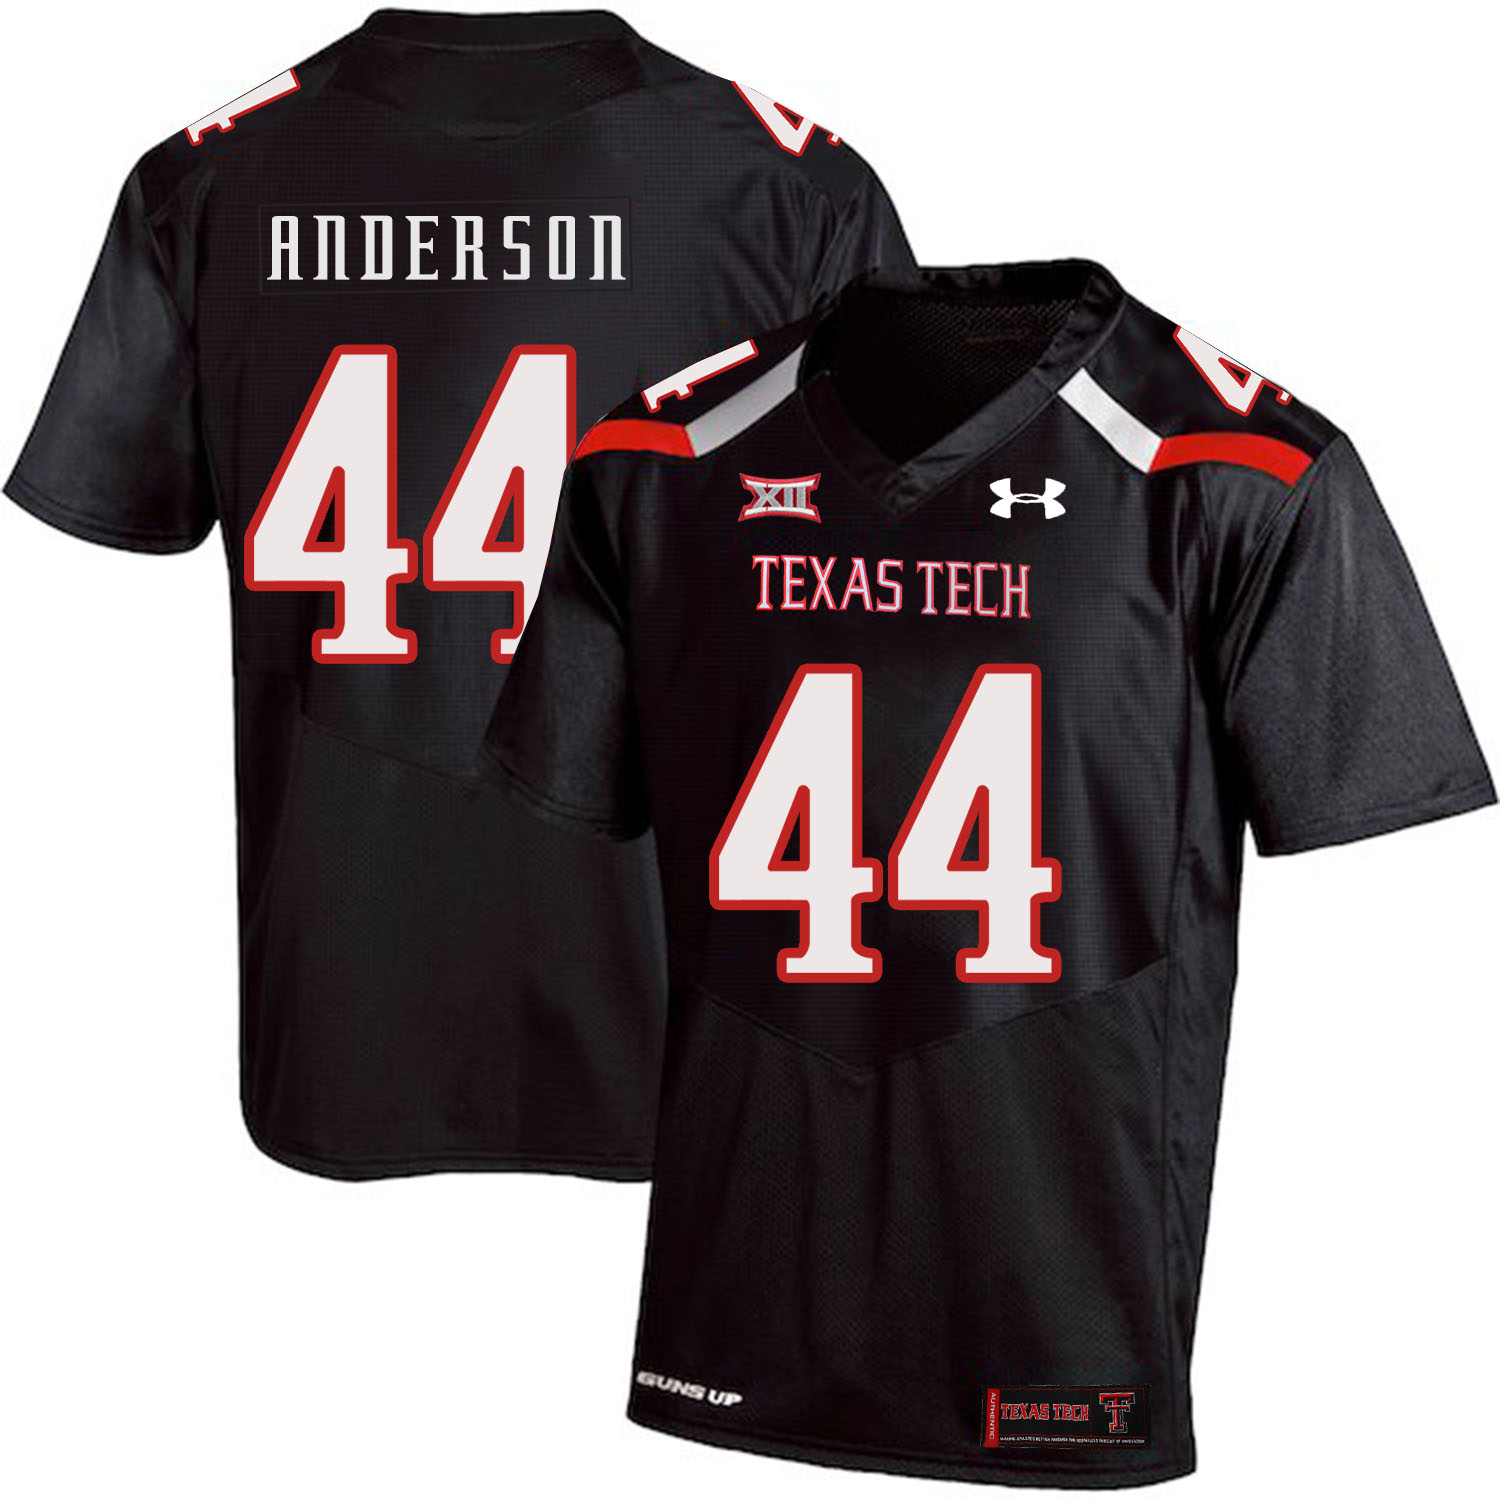 Texas Tech Red Raiders 44 Donny Anderson Black College Football Jersey